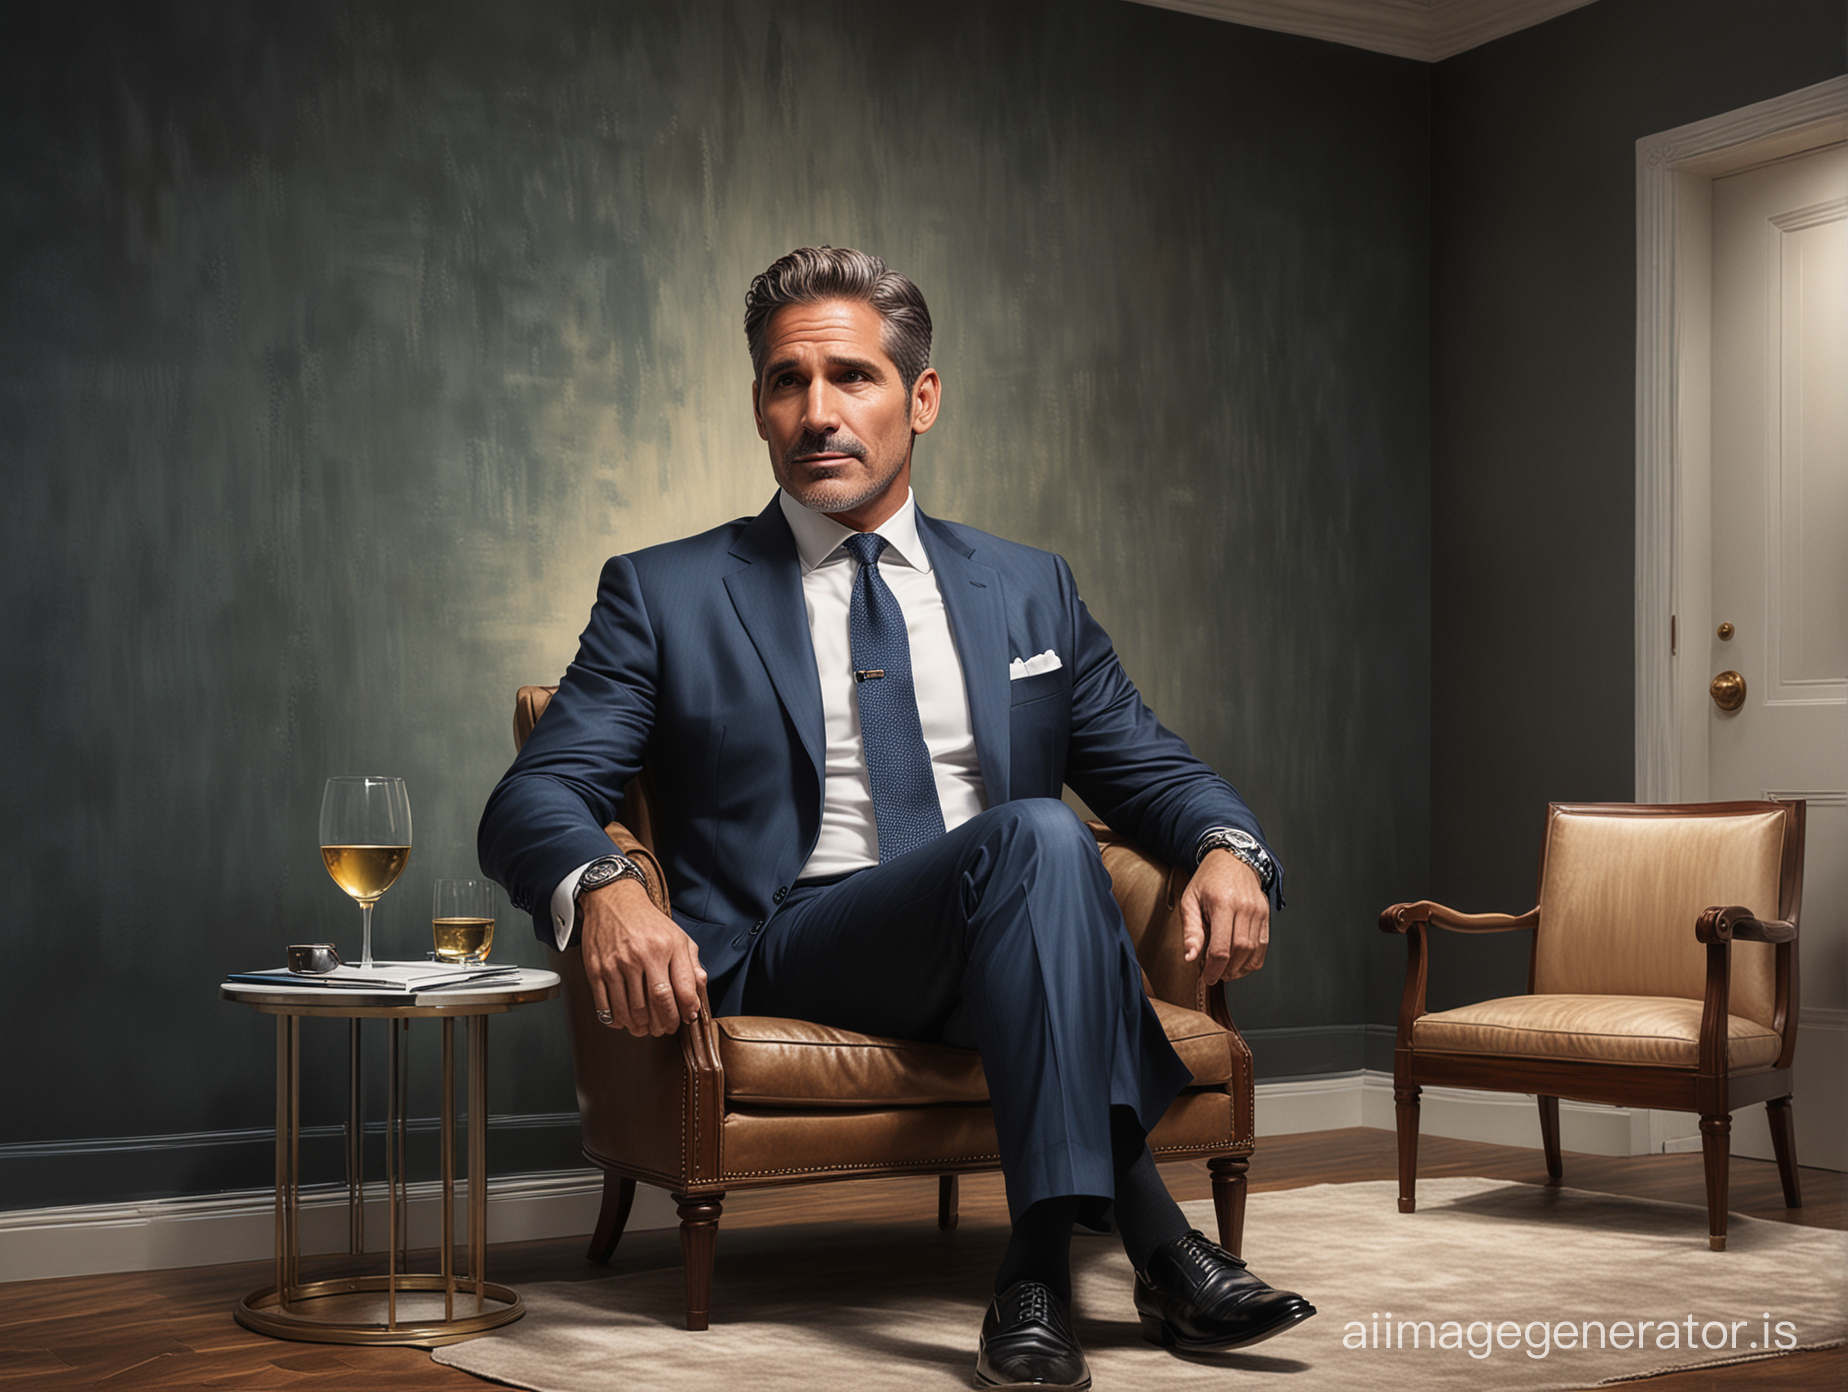 A highly realistic mural capturing Grant Cardone in an elegant, dimly lit study, in mid-conversation, with the ambiance of the room reflecting a sense of future possibilities, hyper realistic, ultra realistic details, sitting on a chair